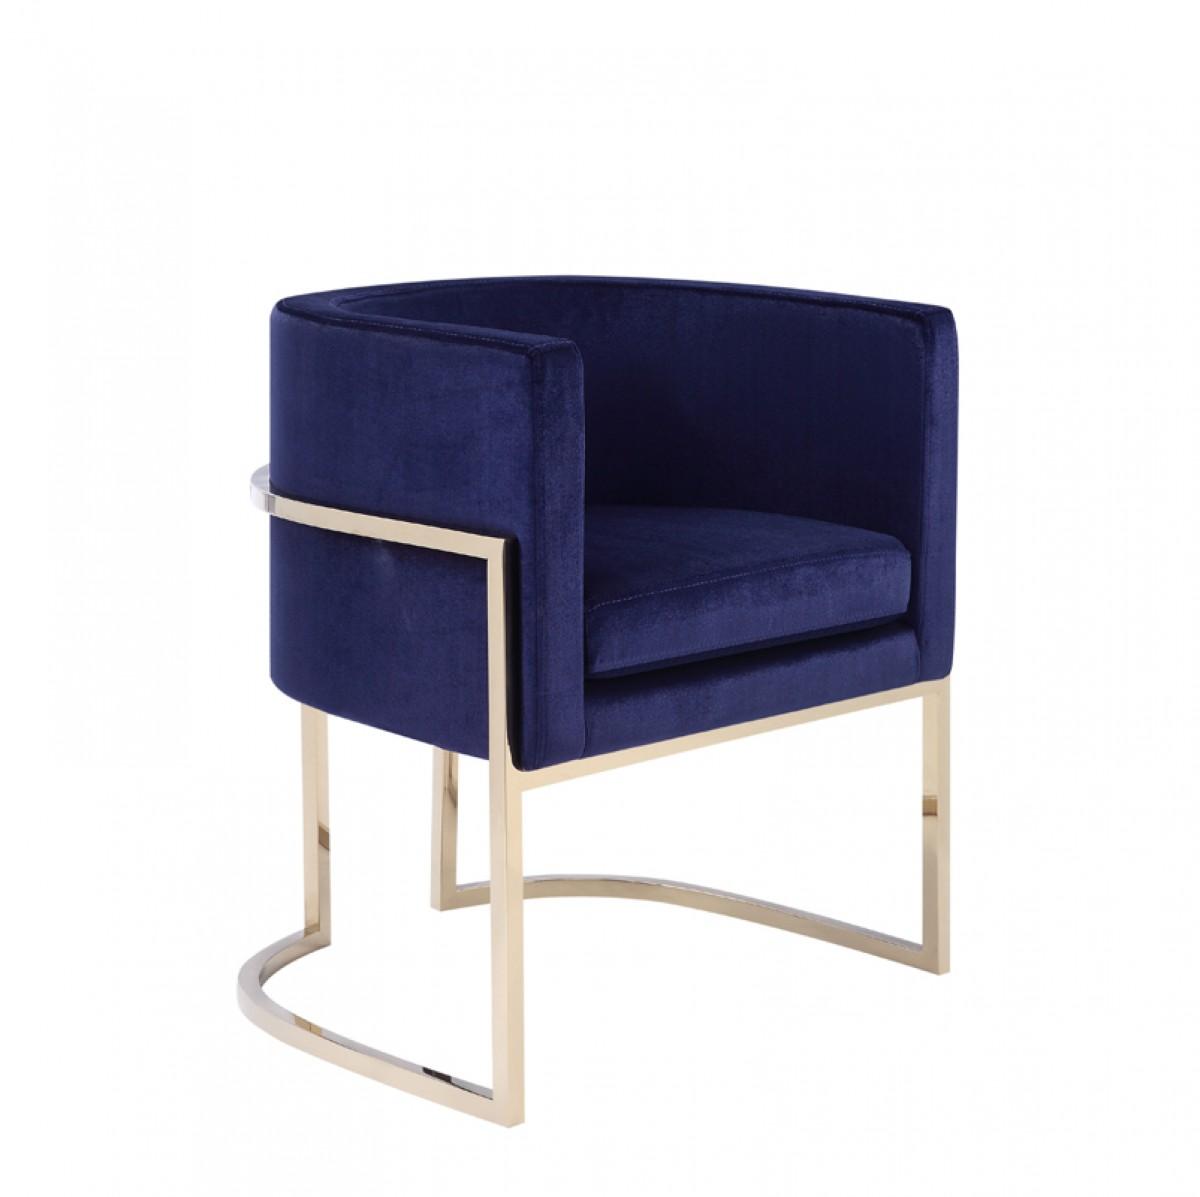   BETSY DINING ARM CHAIR NAVY BLUE 20 VELVET/CHAMPGOLD  